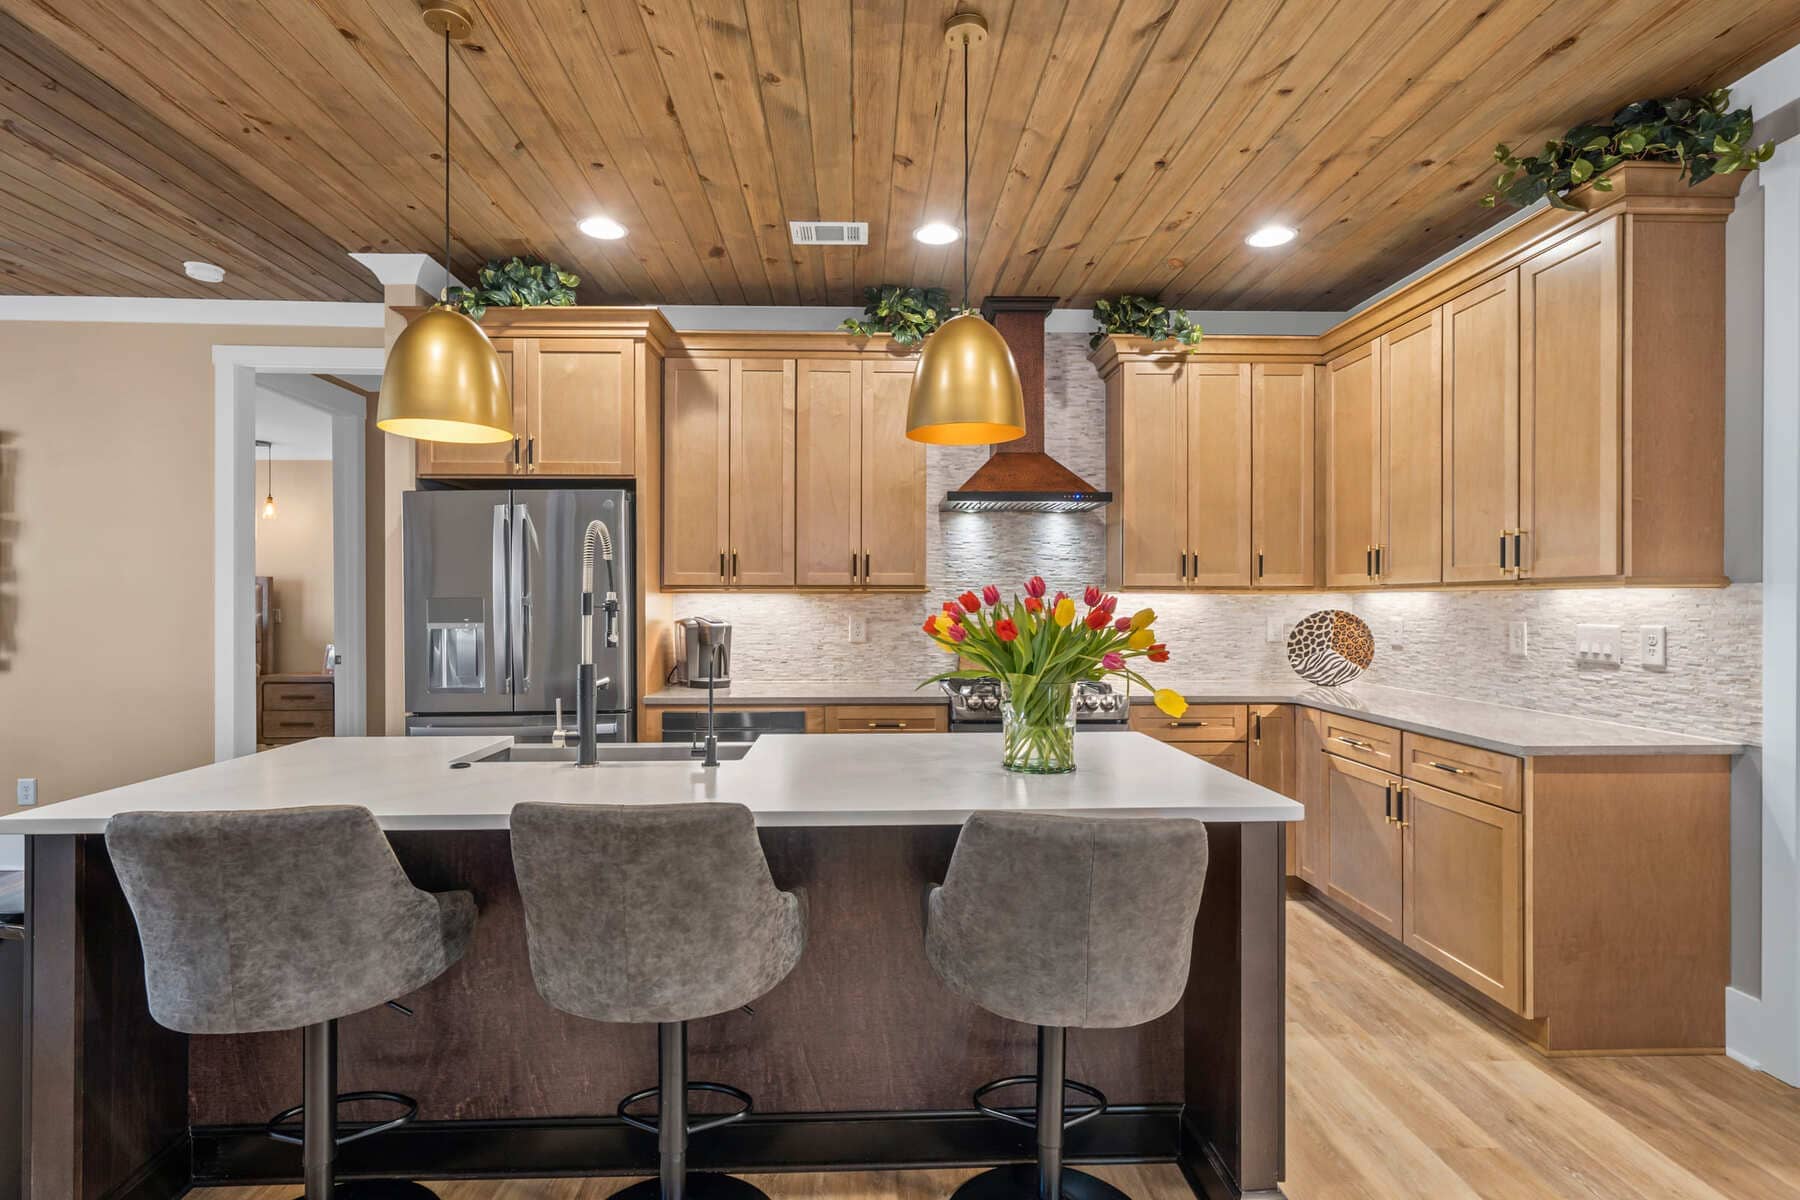 Full Kitchen View with Light Wood Cabinetry and Light Grey Features |PAXISgroup